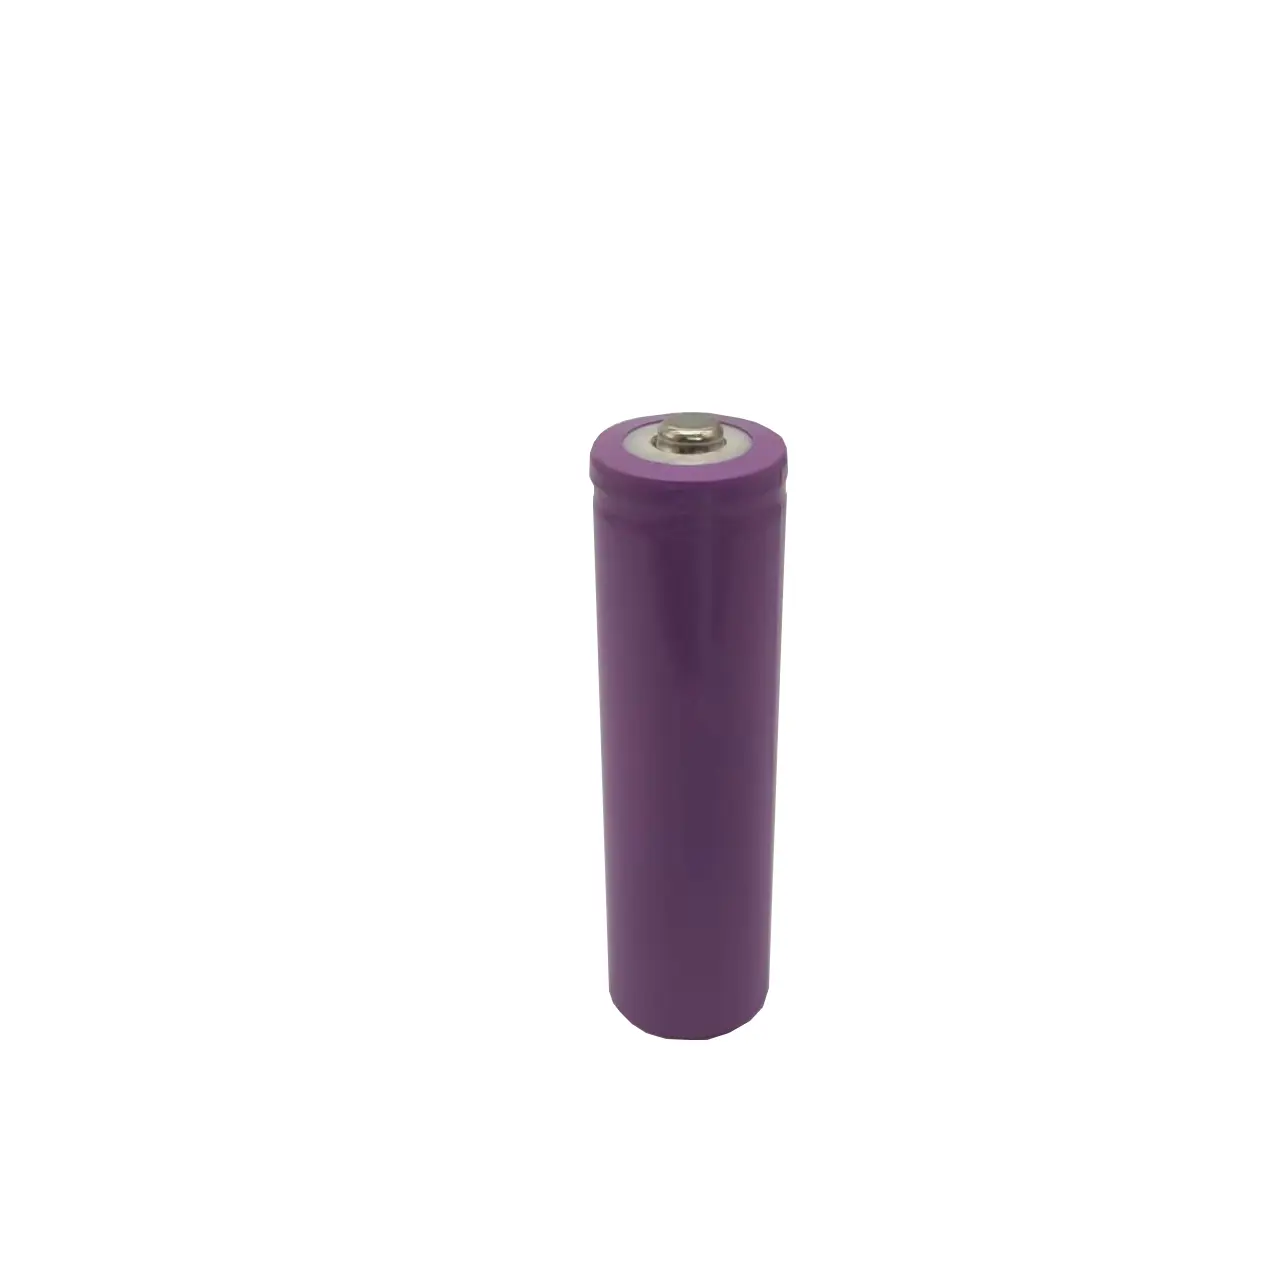 Toy tools Rechargeable tip 18650 3.7V 1200mAh lithium battery